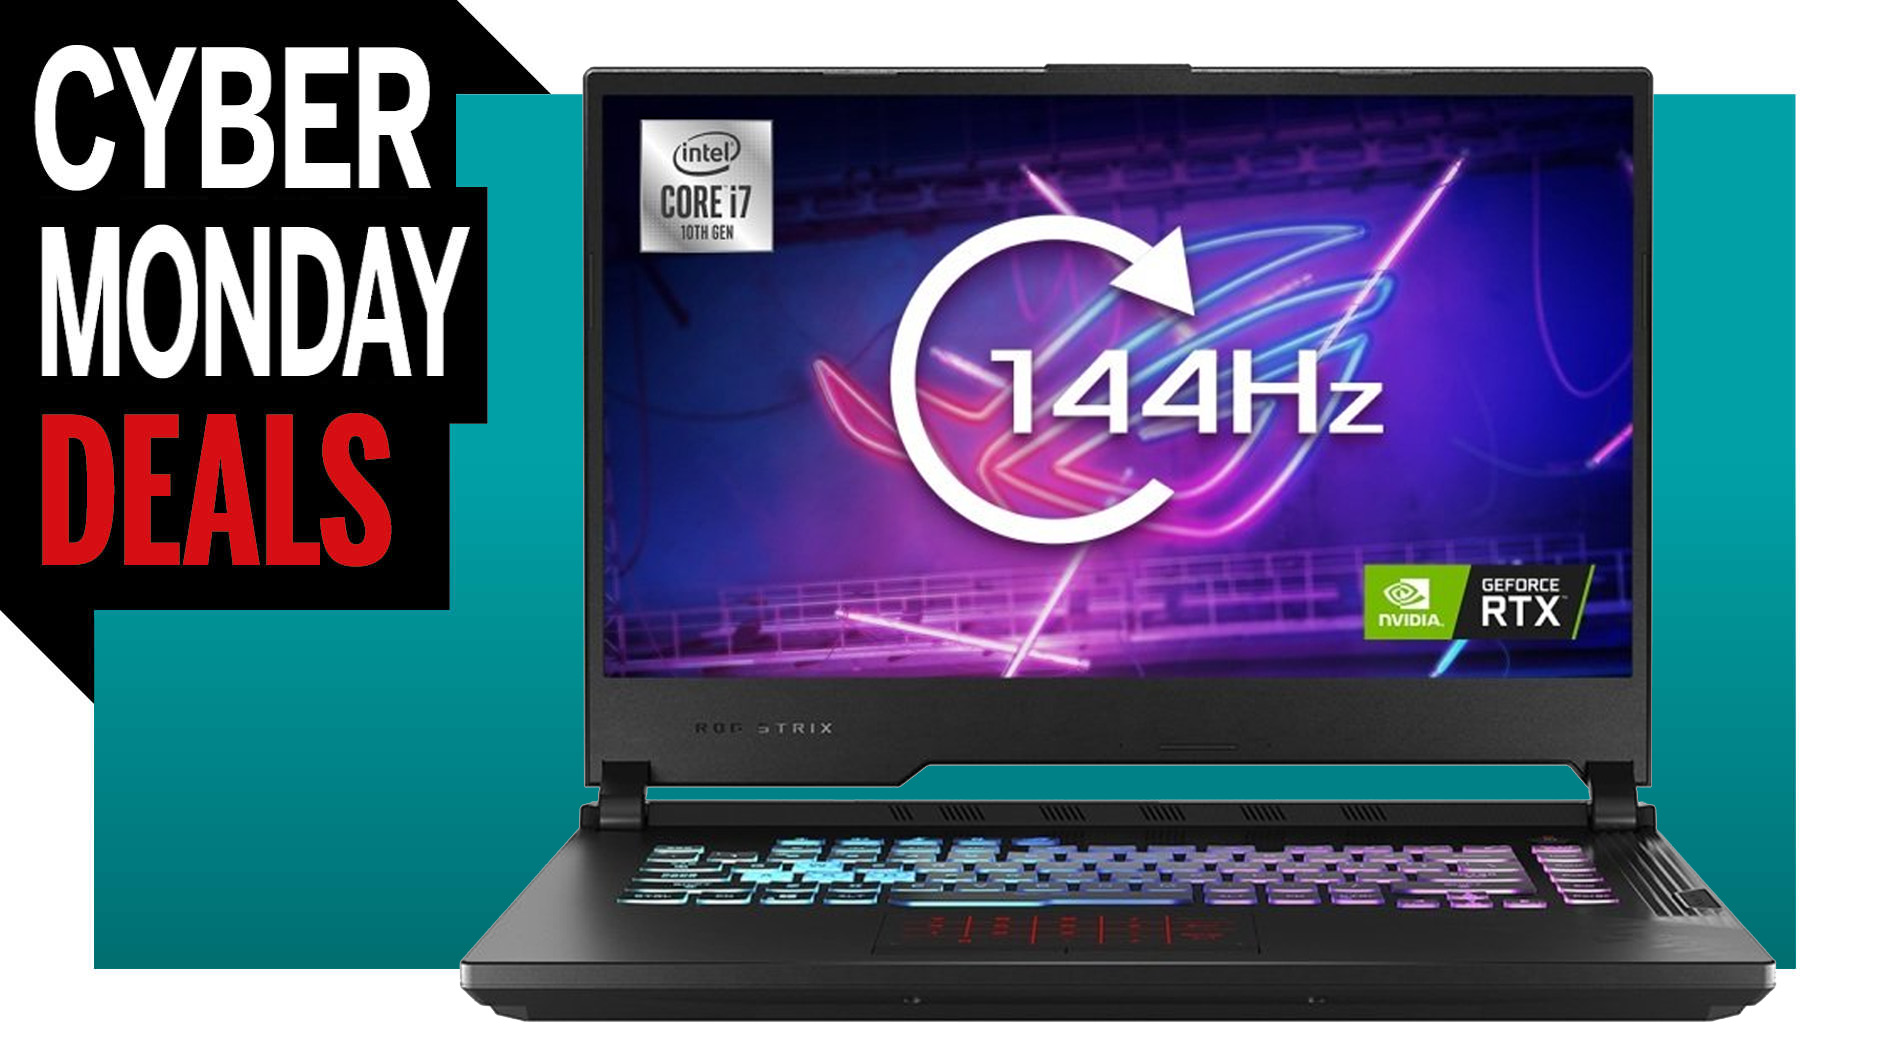  The RTX 2070 Asus Strix G15 gaming laptop is just £1,300 